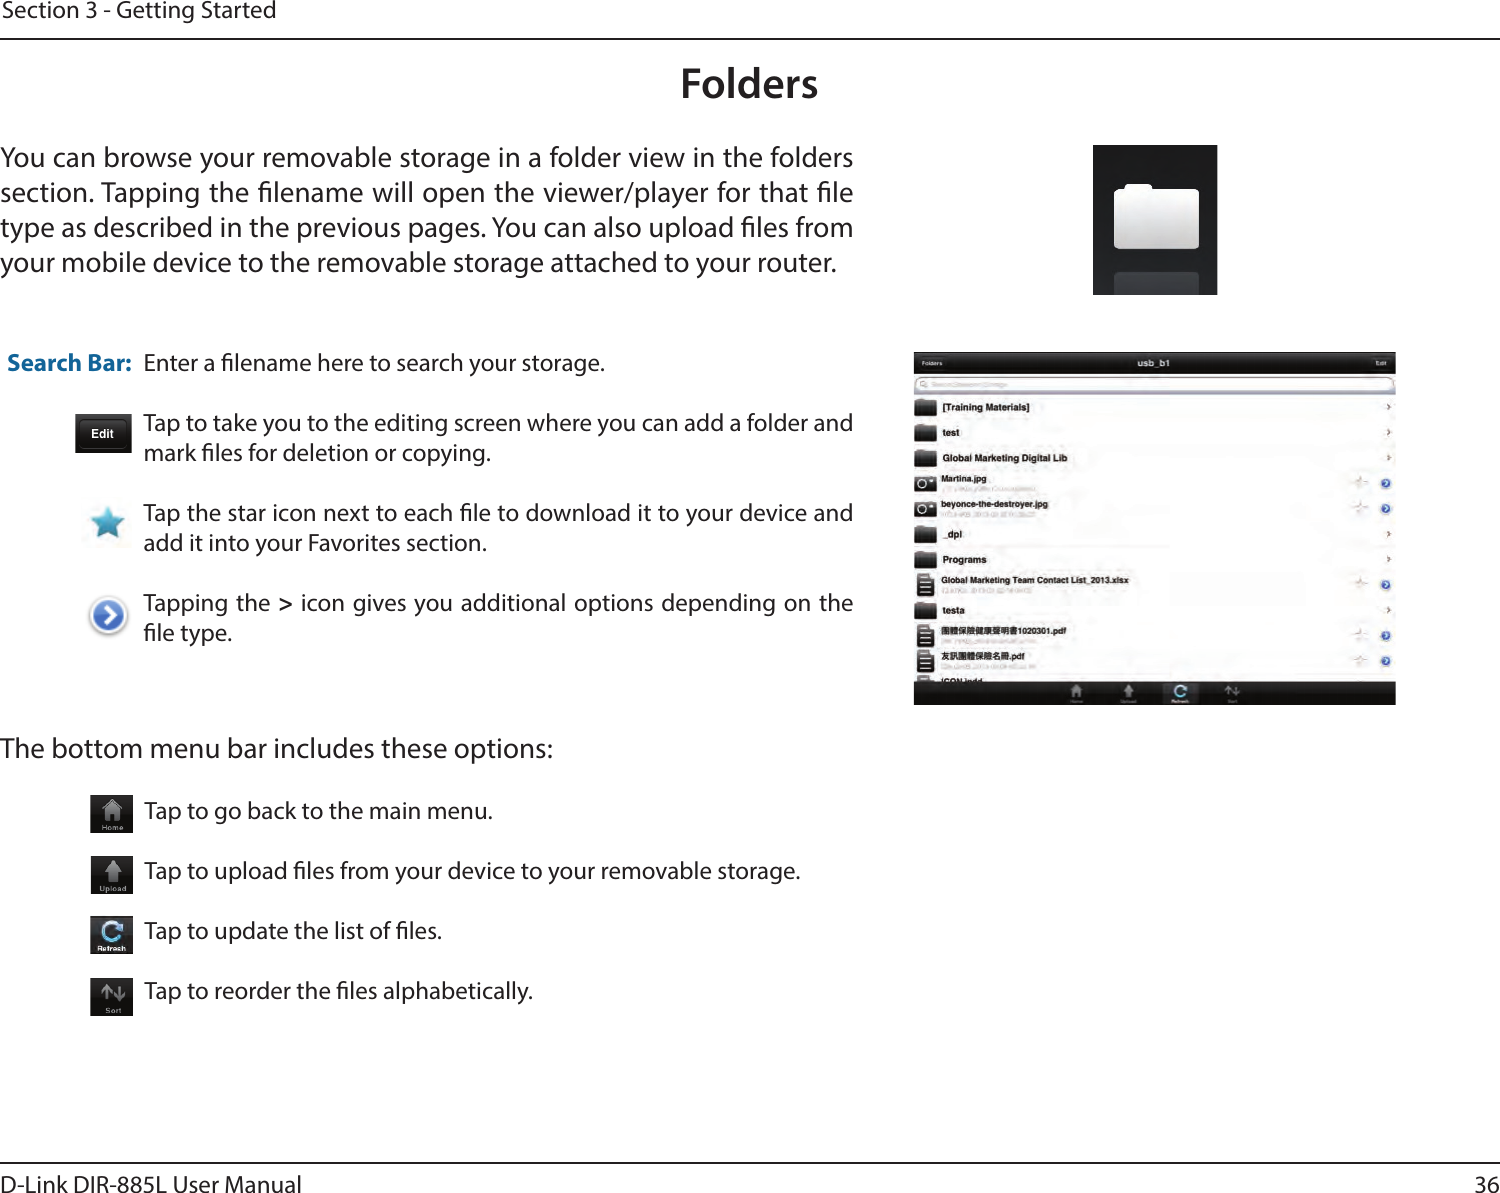 36D-Link DIR-885L User ManualSection 3 - Getting StartedFoldersYou can browse your removable storage in a folder view in the folders section. Tapping the lename will open the viewer/player for that le type as described in the previous pages. You can also upload les from your mobile device to the removable storage attached to your router.Enter a lename here to search your storage.Tap to take you to the editing screen where you can add a folder and mark les for deletion or copying.Tap the star icon next to each le to download it to your device and add it into your Favorites section.Tapping the &gt; icon gives you additional options depending on the le type.Search Bar:The bottom menu bar includes these options:Tap to go back to the main menu.Tap to upload les from your device to your removable storage.Tap to update the list of les.Tap to reorder the les alphabetically.